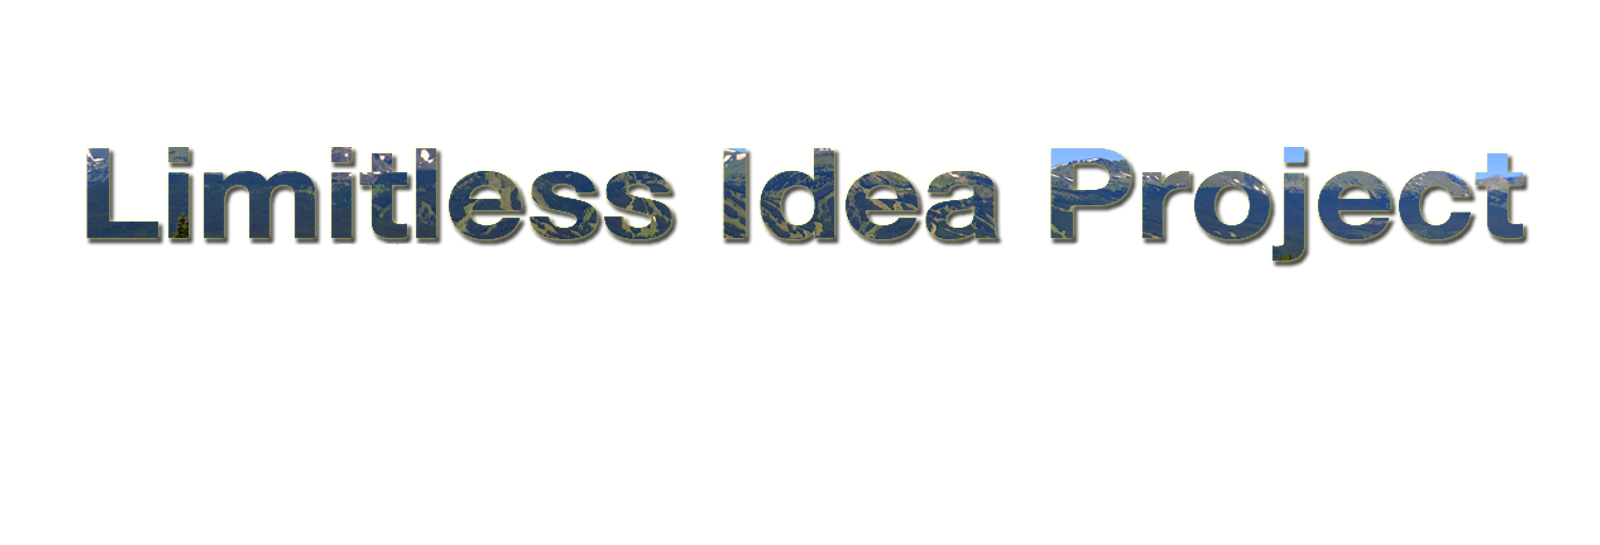 Limitless Idea Project writes, designs and communicates clear expressive cotent for websites and marketing.